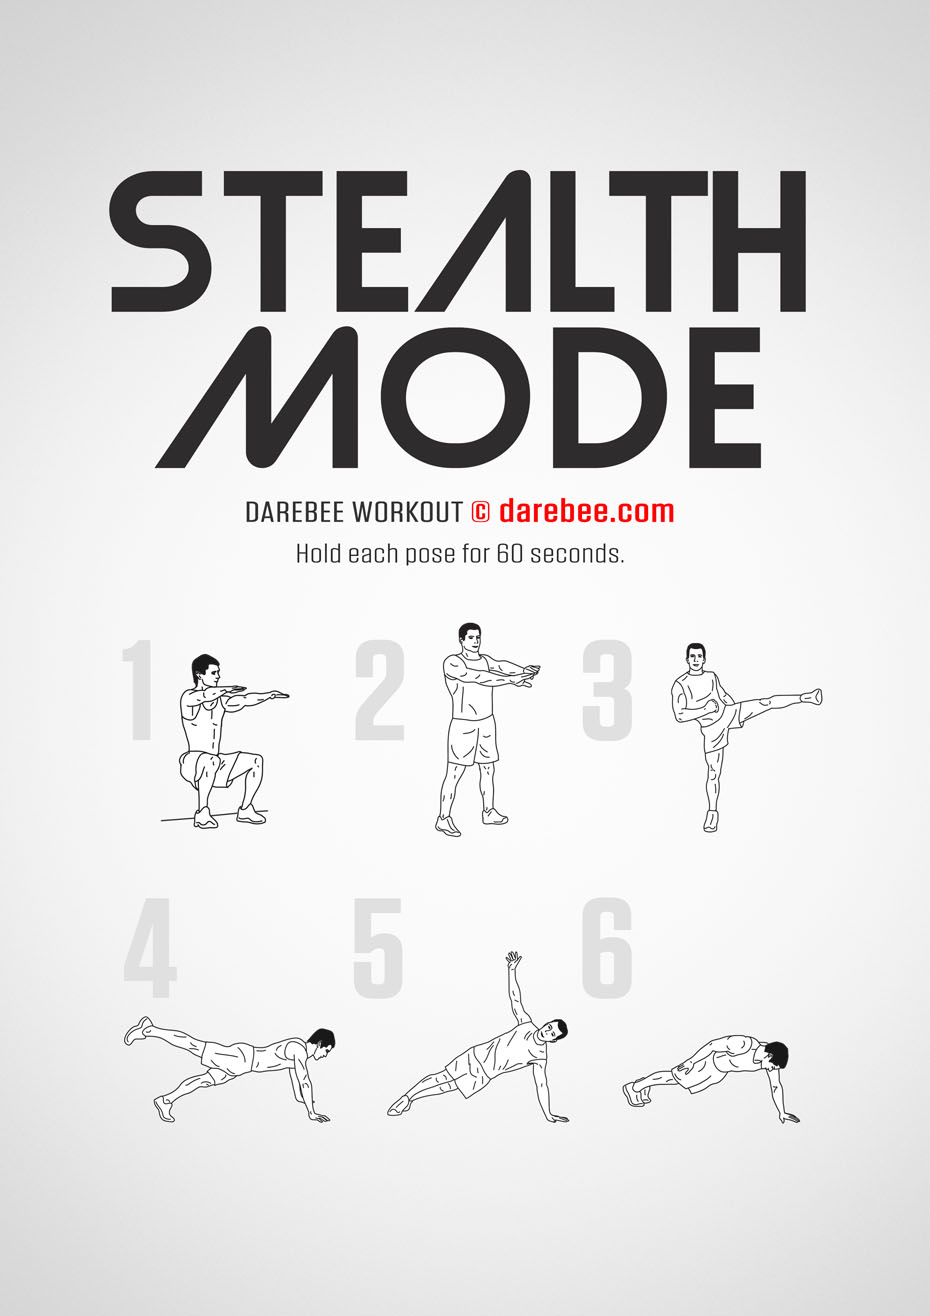 Stealth Mode is a total body Darebee fitness workout that uses a mix of isometric and isotonic exercises to work muscles and tendons that play key parts in the body's kinetic chain, thereby delivering increased power.